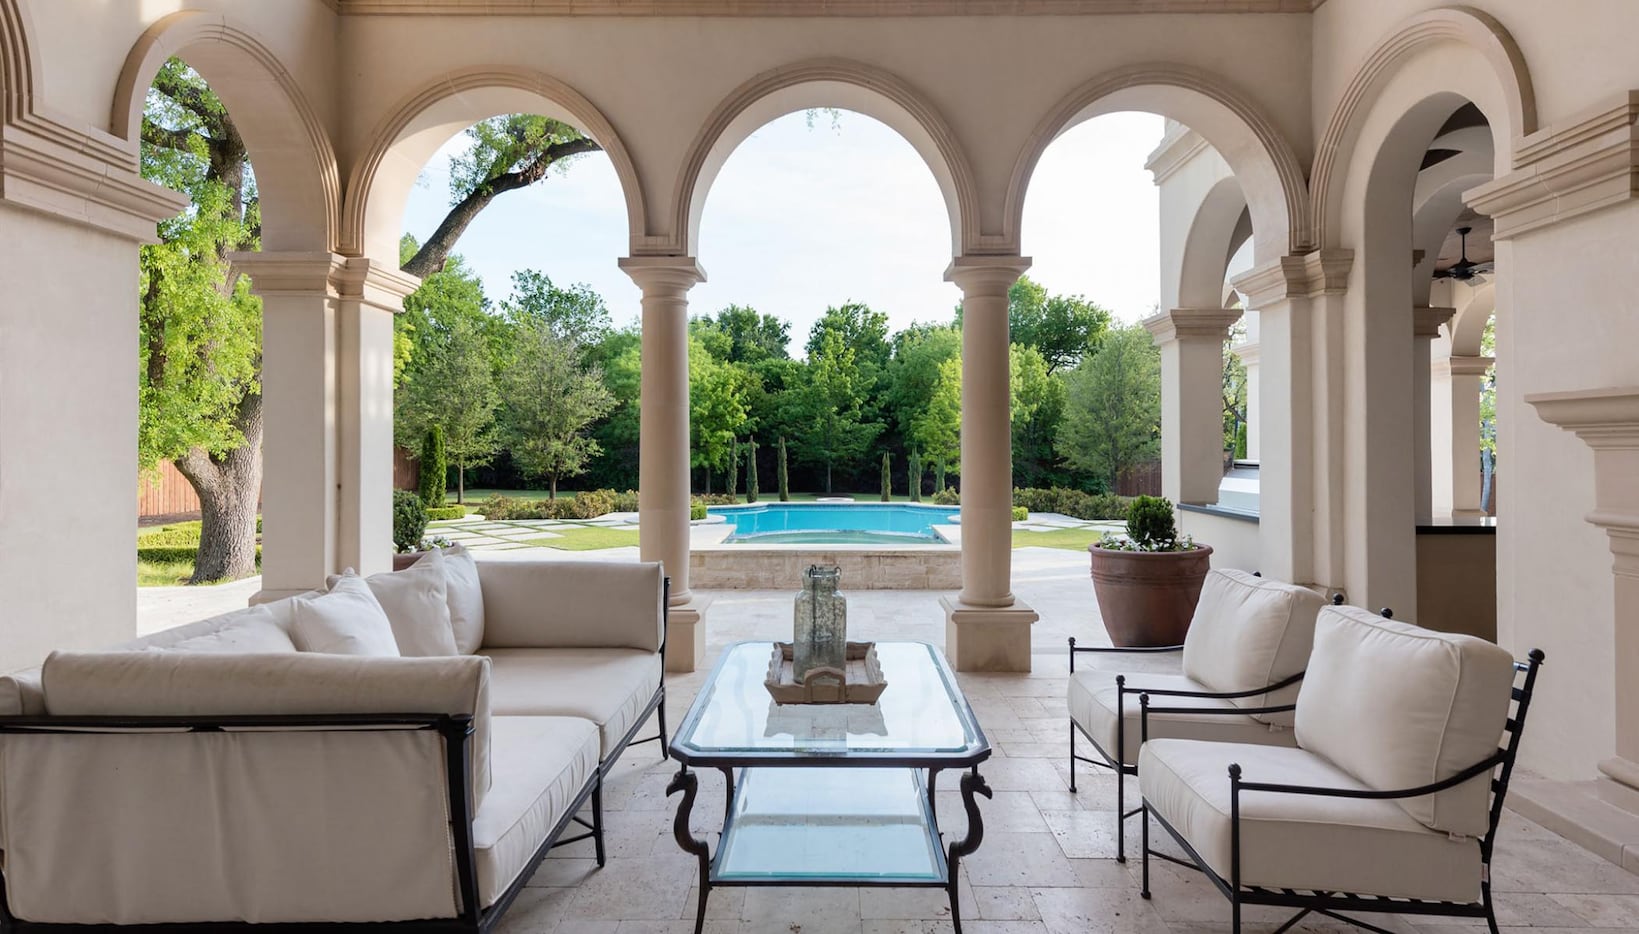 This Mediterranean-style mansion in Old Preston Hollow is on the market for $13.95 million.